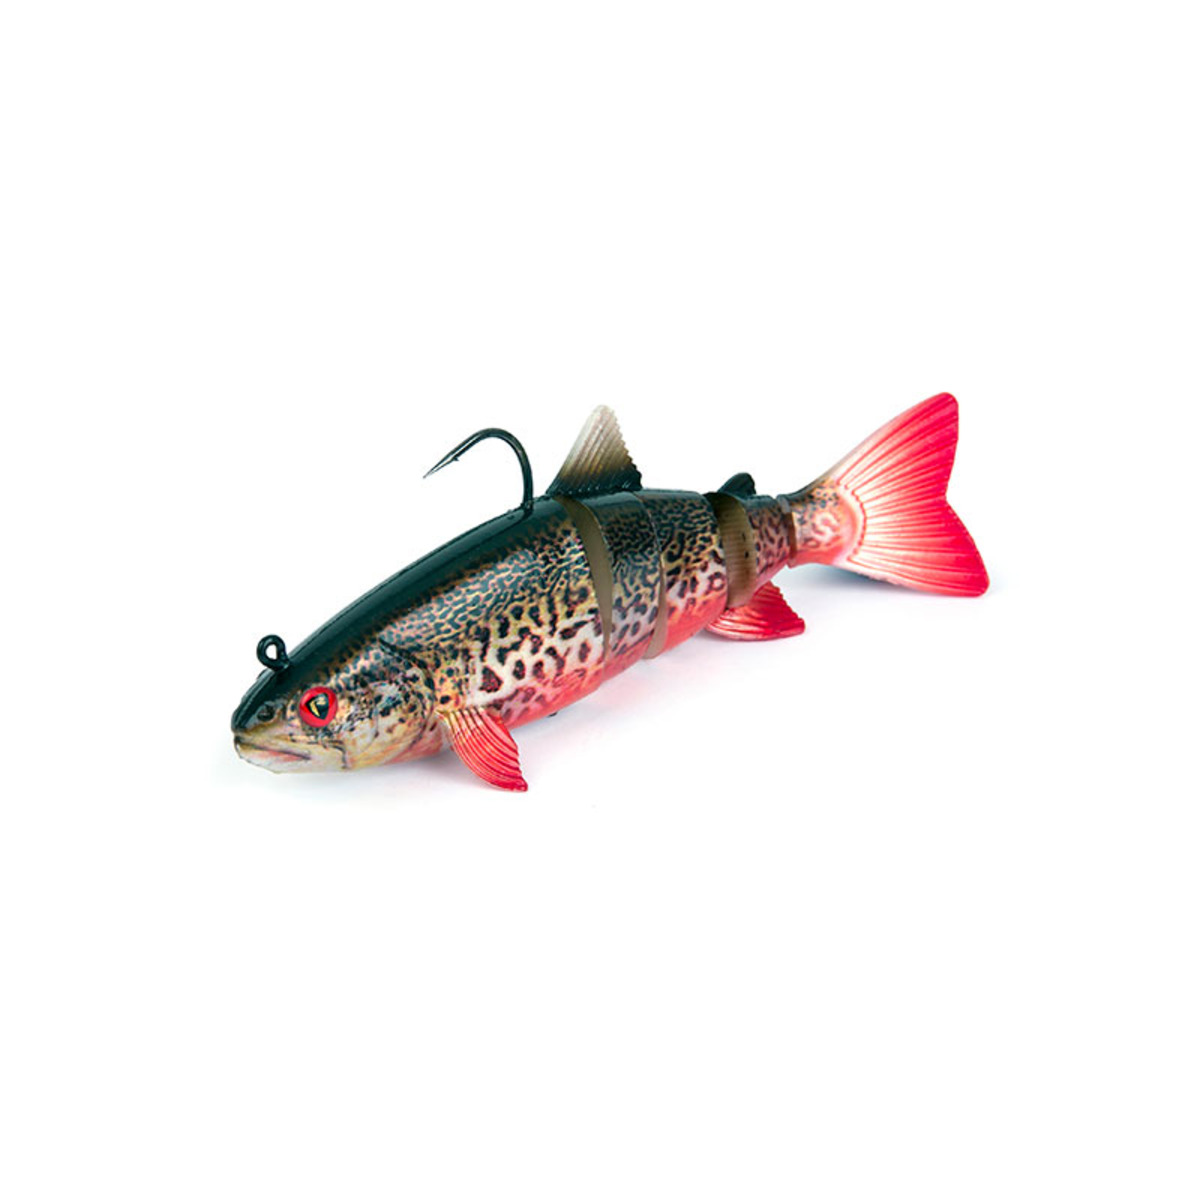 Fox Rage Realistic Replicant Trout Jointed 14 Cm/5.5 50g - Super Natural Tiger Trout x 1pcs